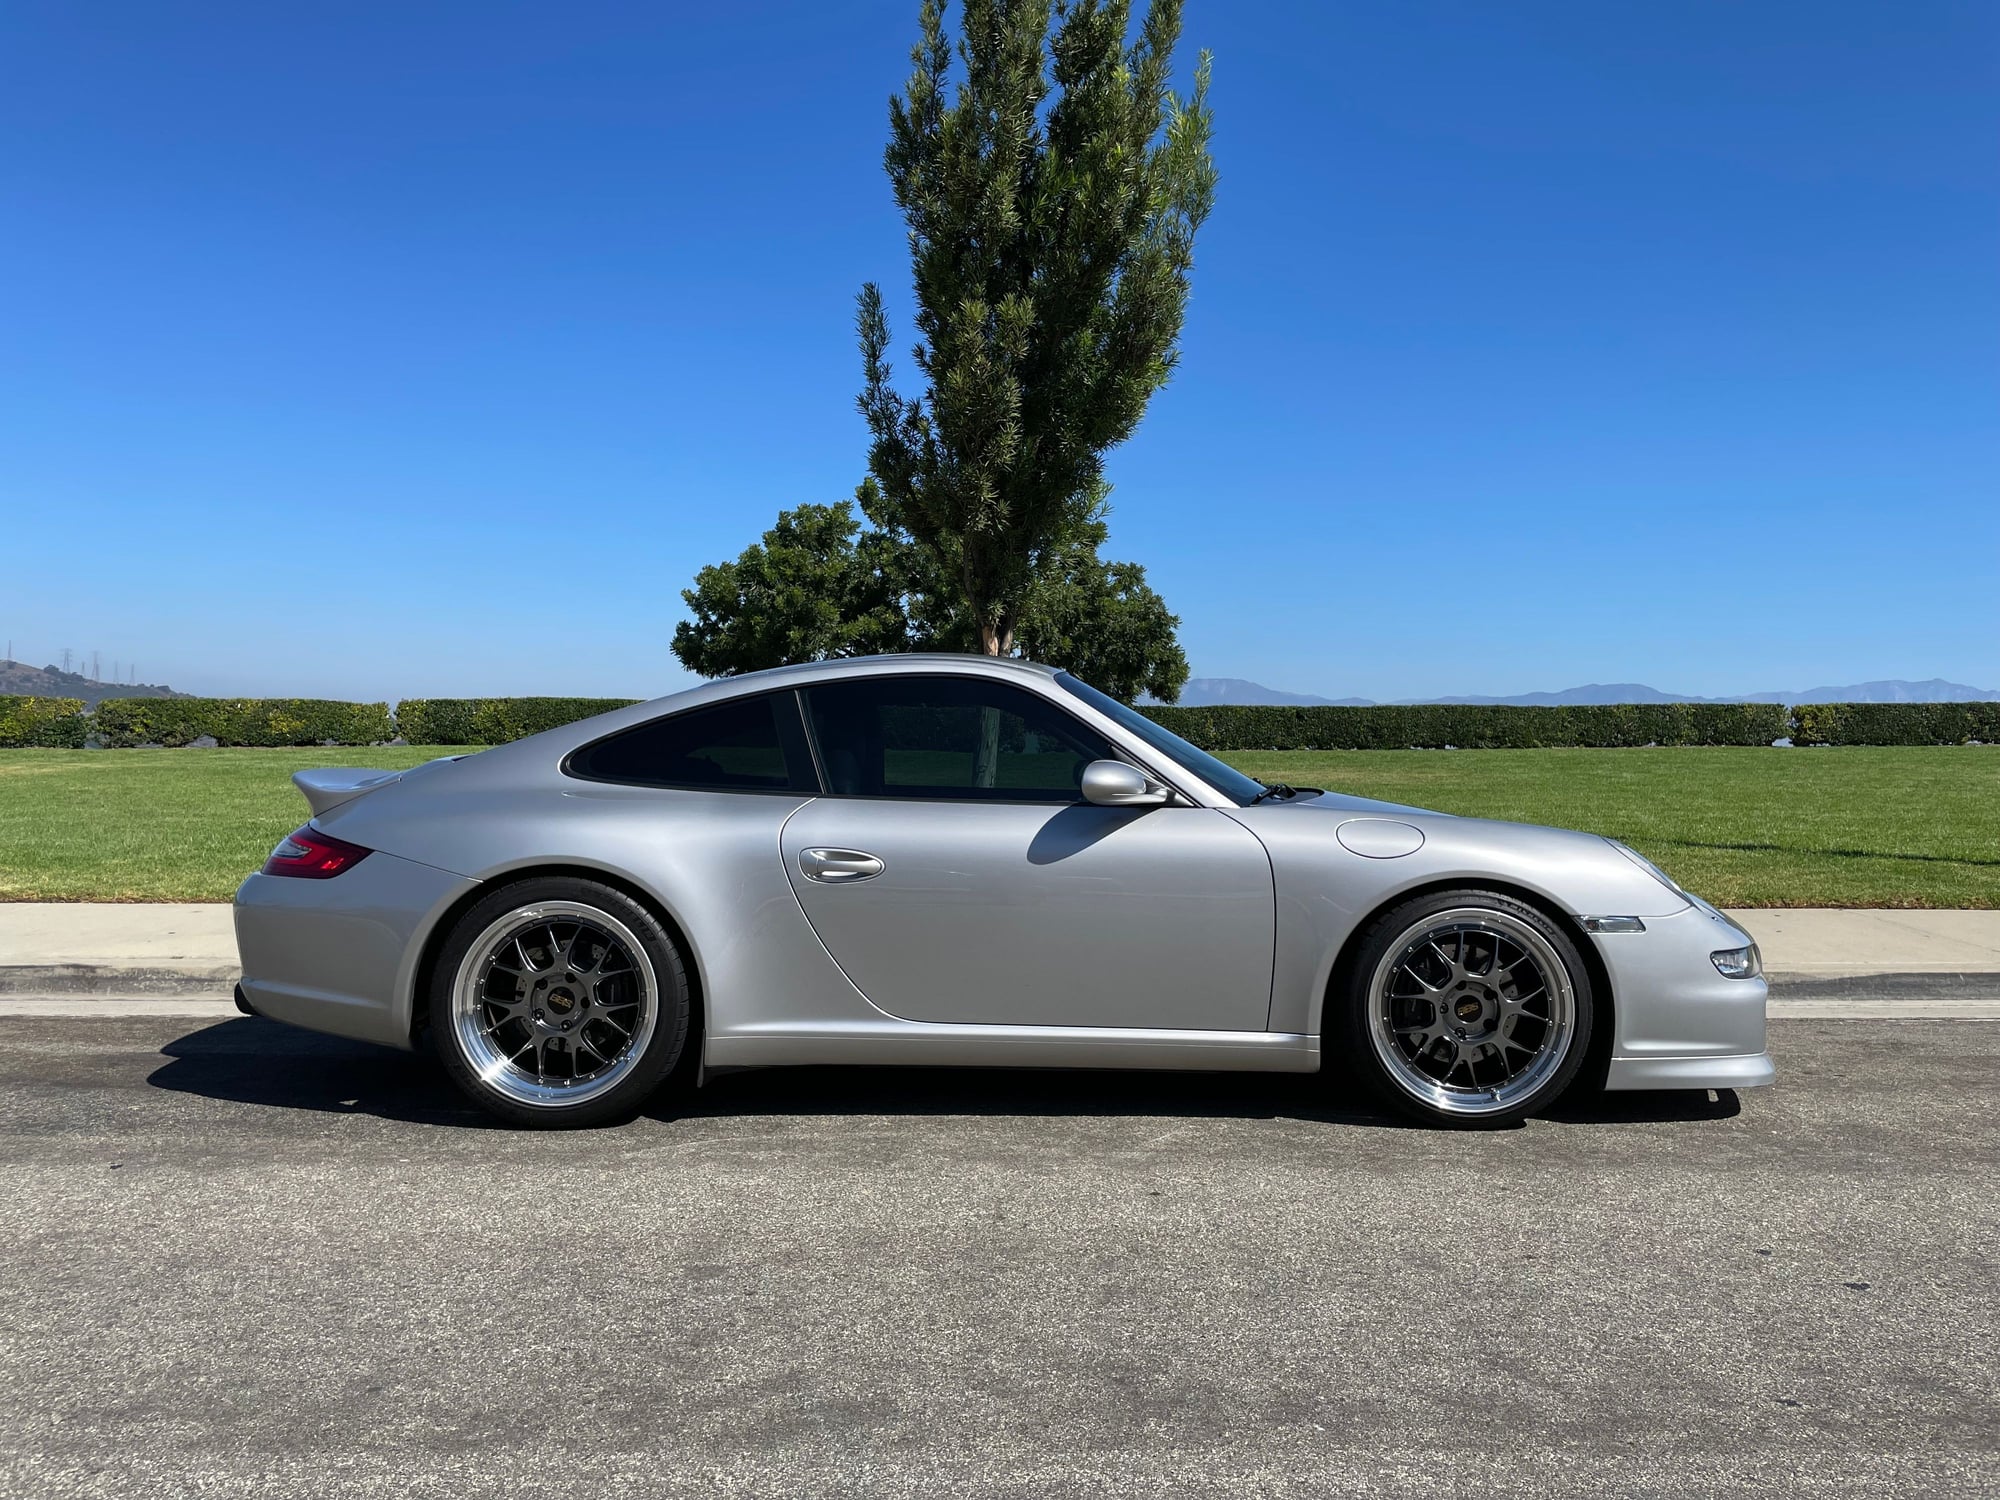 Wheels and Tires/Axles - BBS LMR - Used - 2005 to 2012 Porsche 911 - Industry, CA 91789, United States